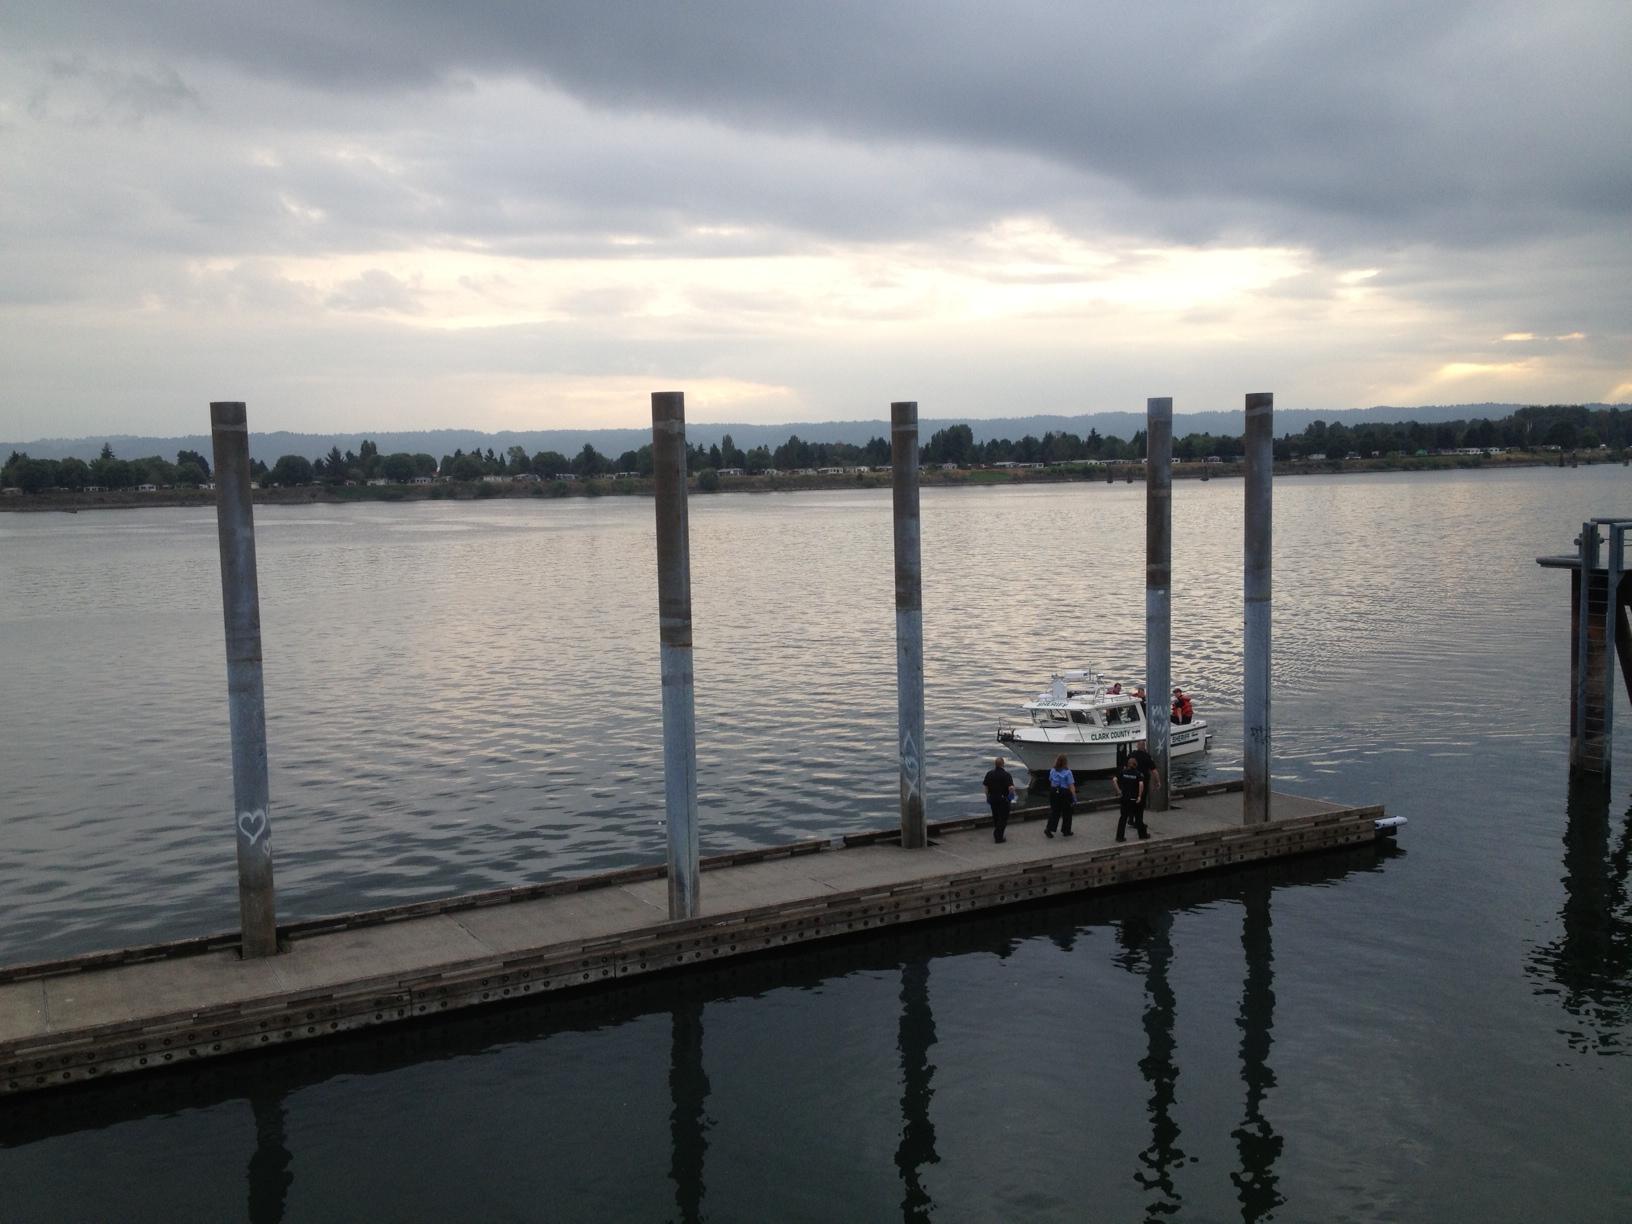 A Clark County Sheriff's Office boat approaches the dock at Vancouver Landing after a body was recovered Wednesday evening just downstream in the Columbia River.